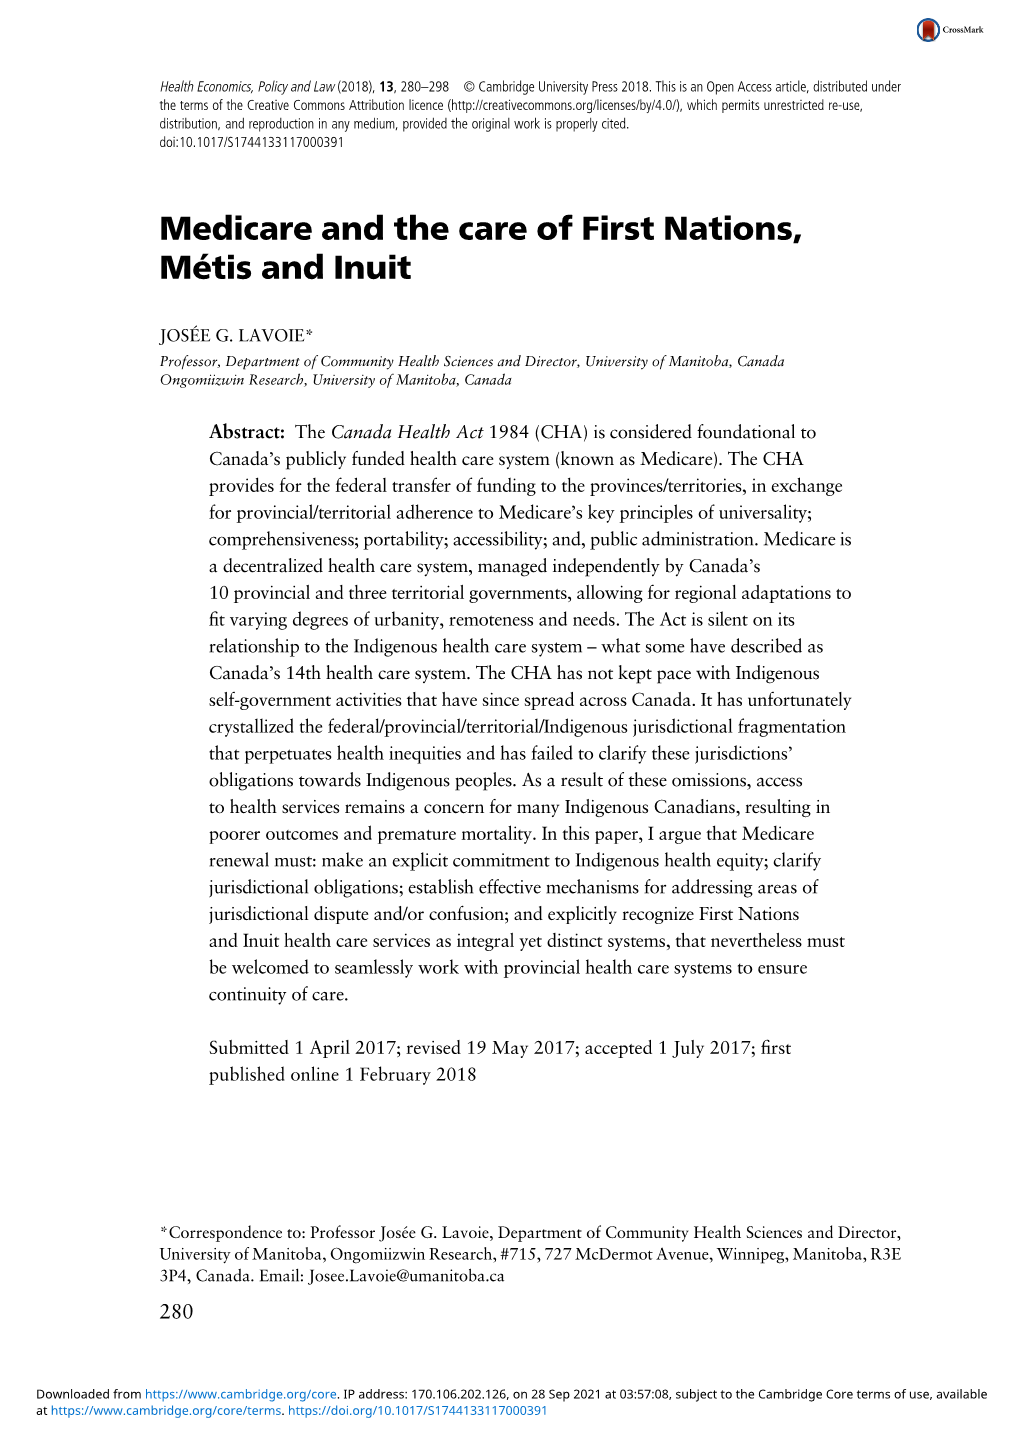 Medicare and the Care of First Nations, Métis and Inuit